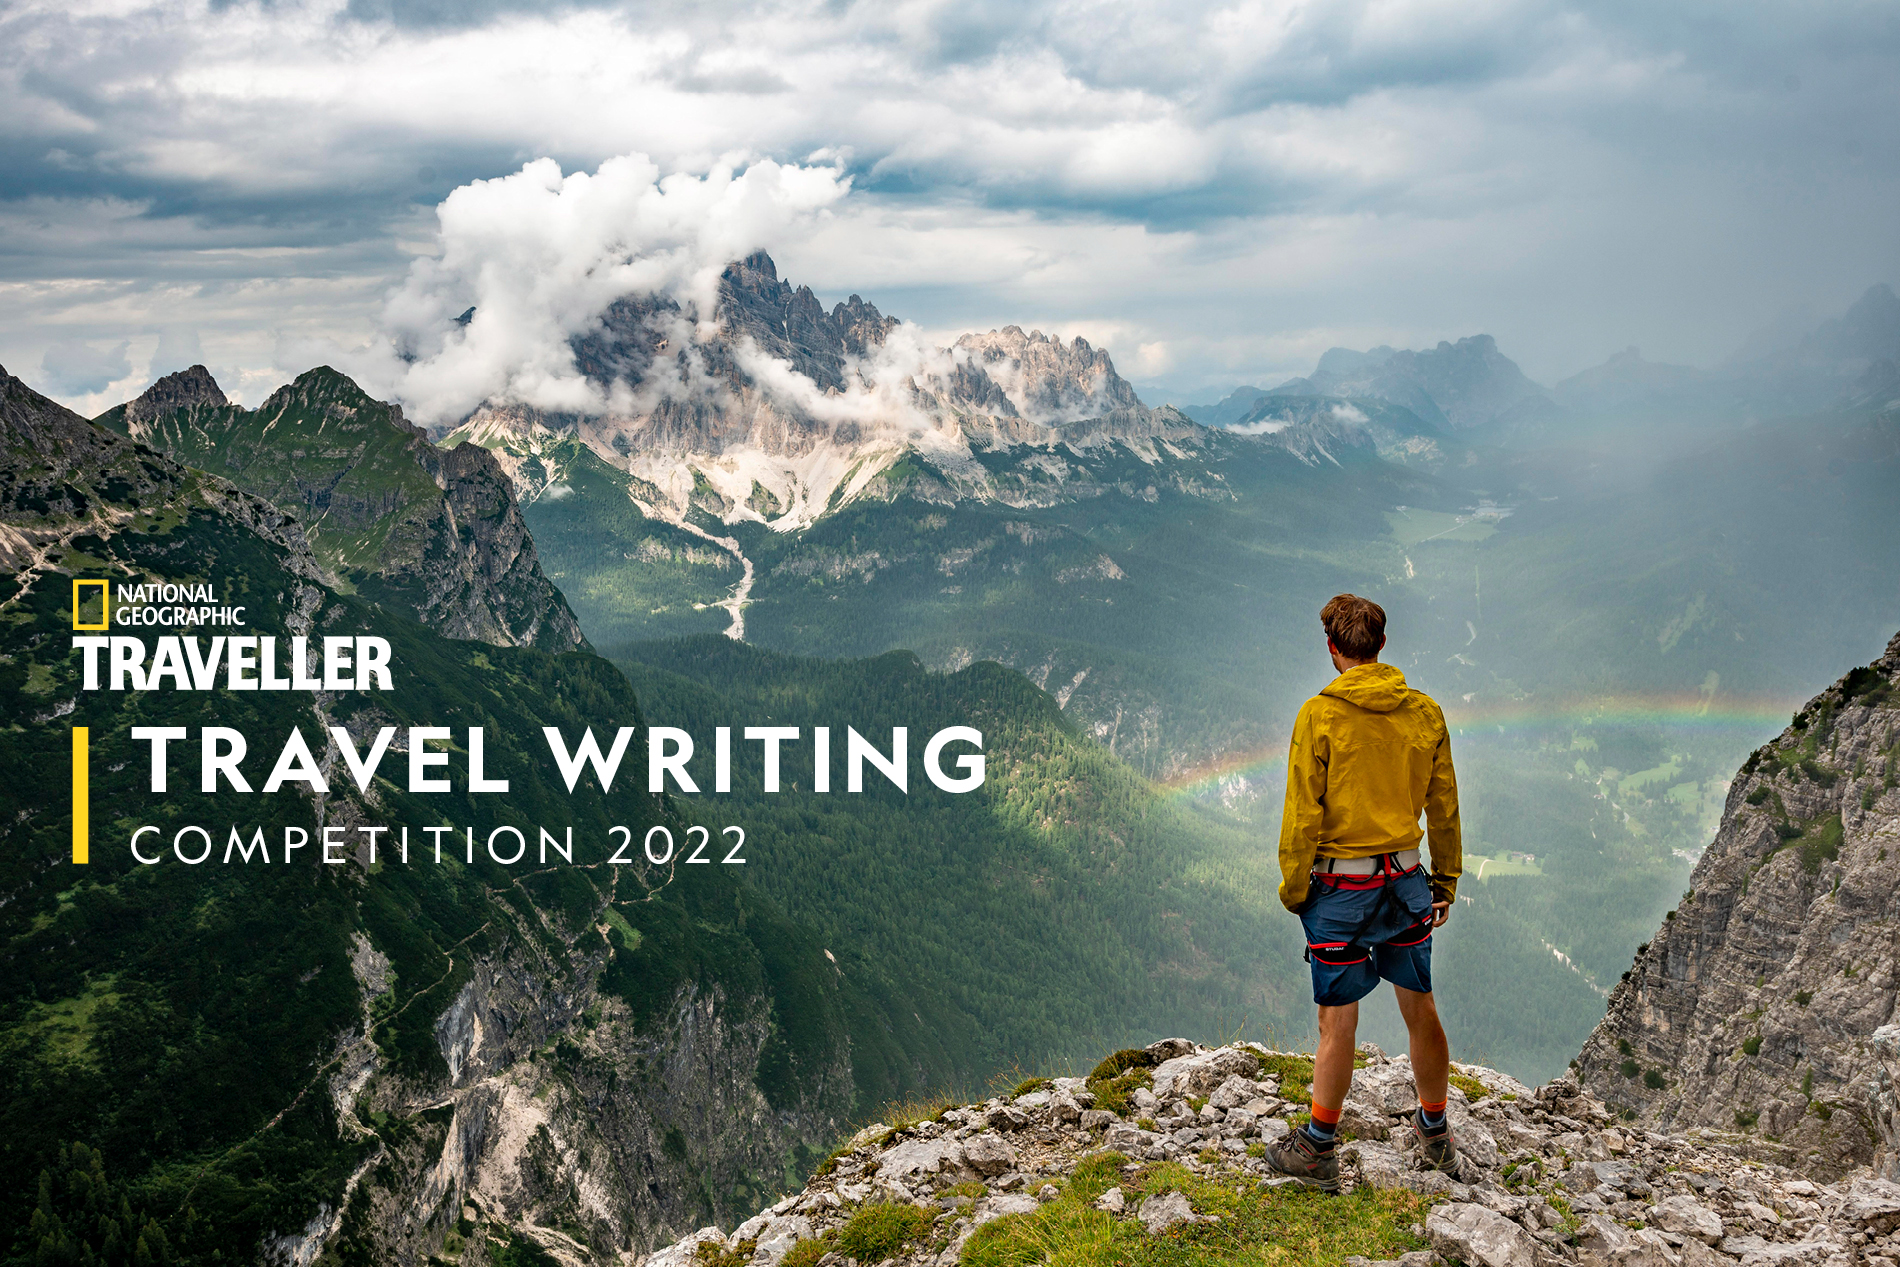 For immediate release National Geographic Traveller (UK) Travel Writing